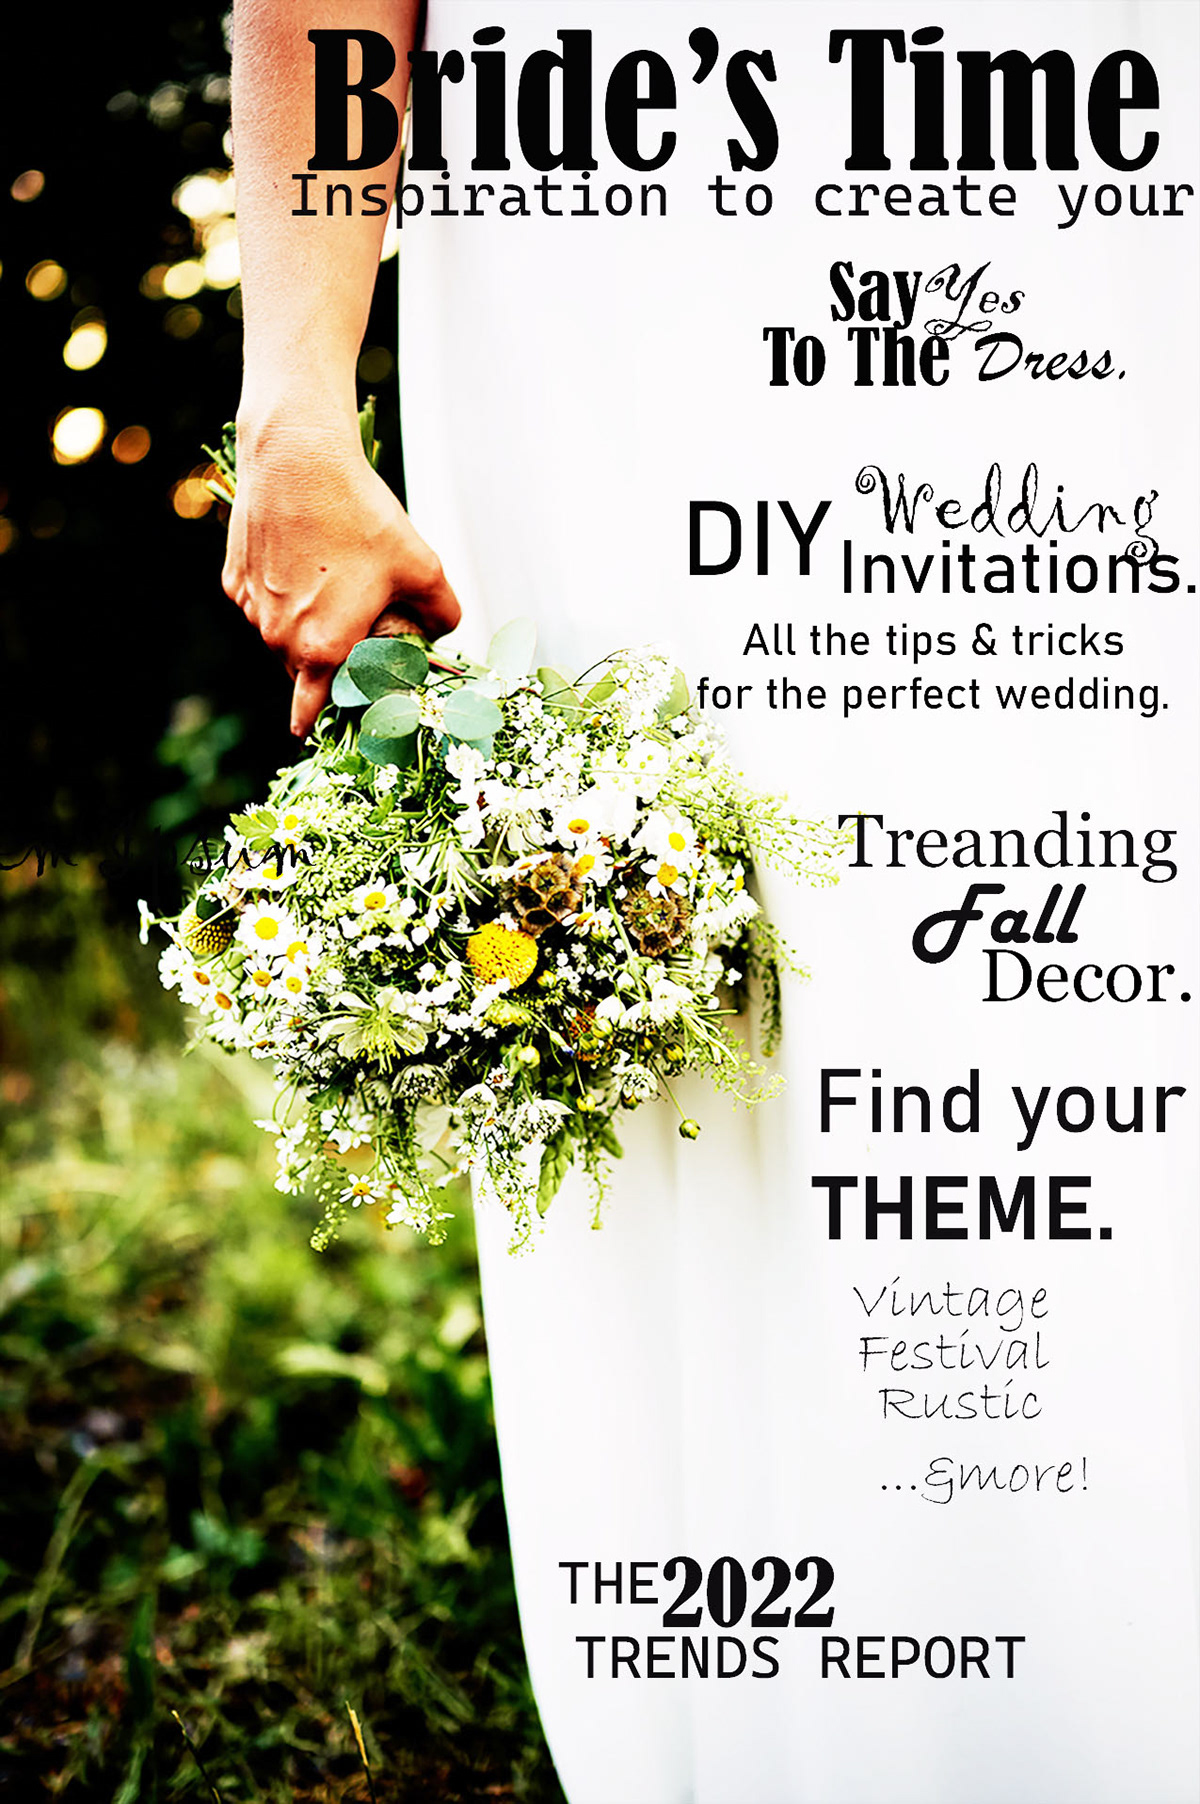 I created this Wedding magazine cover for all brides.